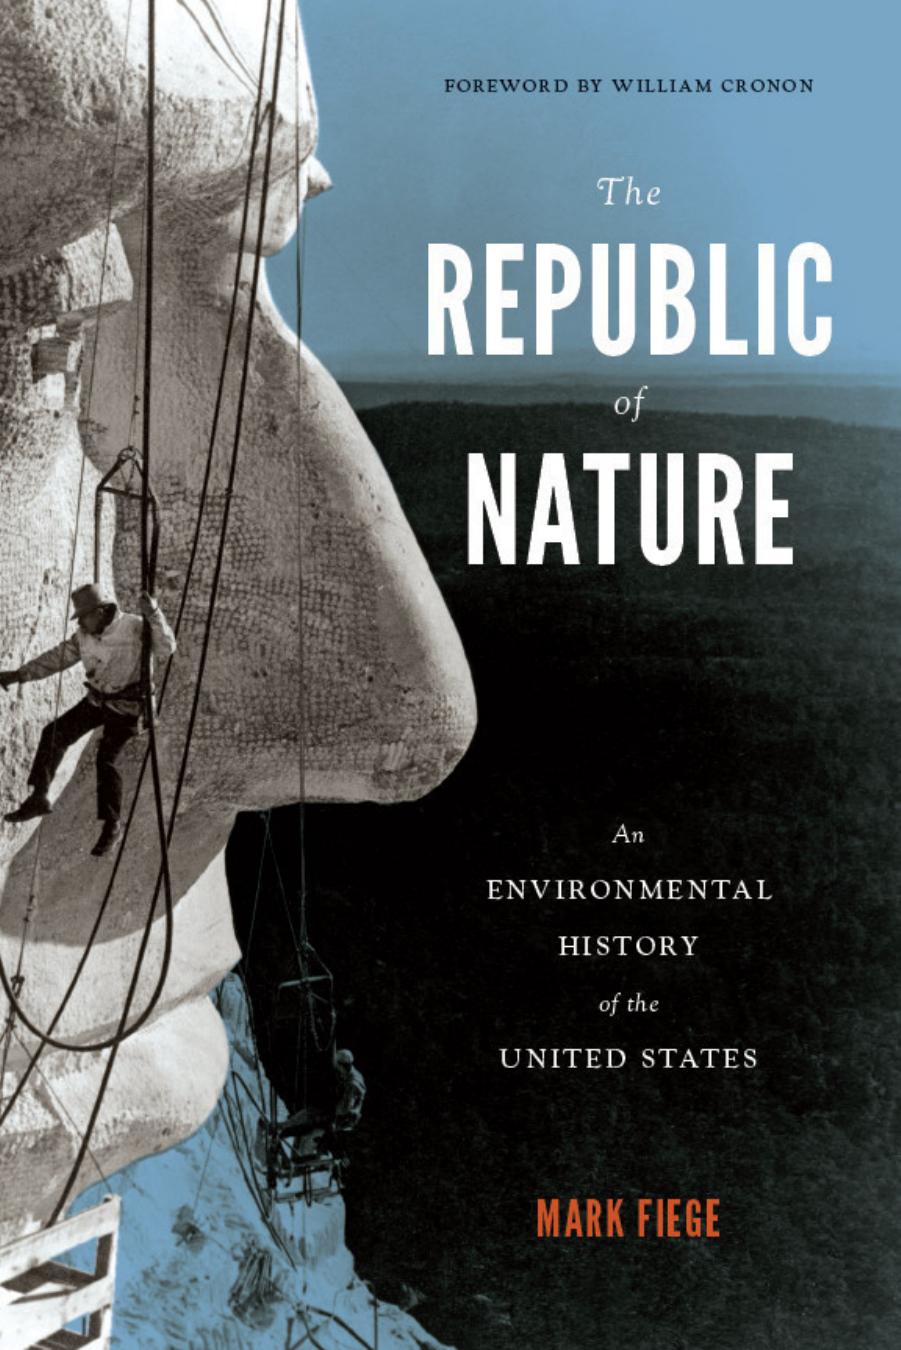 The Republic of Nature: An Environmental History of the United States by Mark Fiege